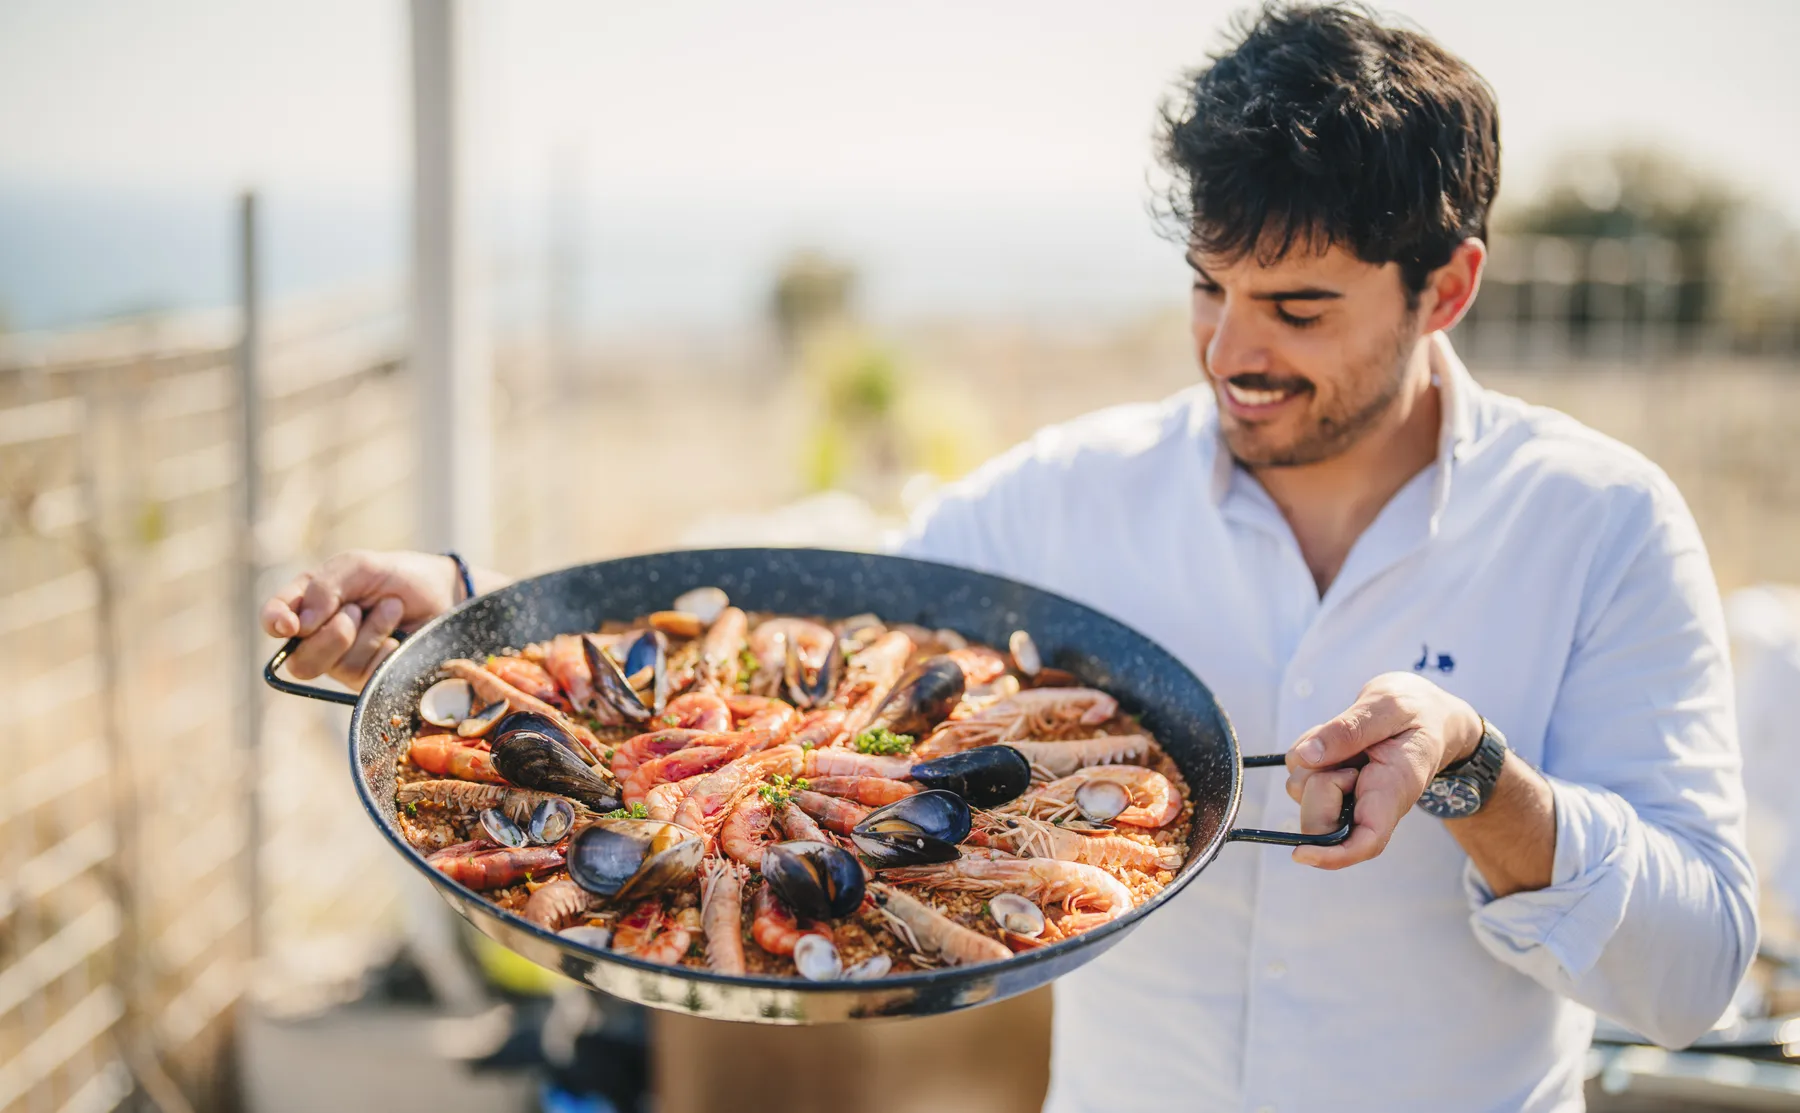 Paella cooking experience & Winery tour  - 1506500